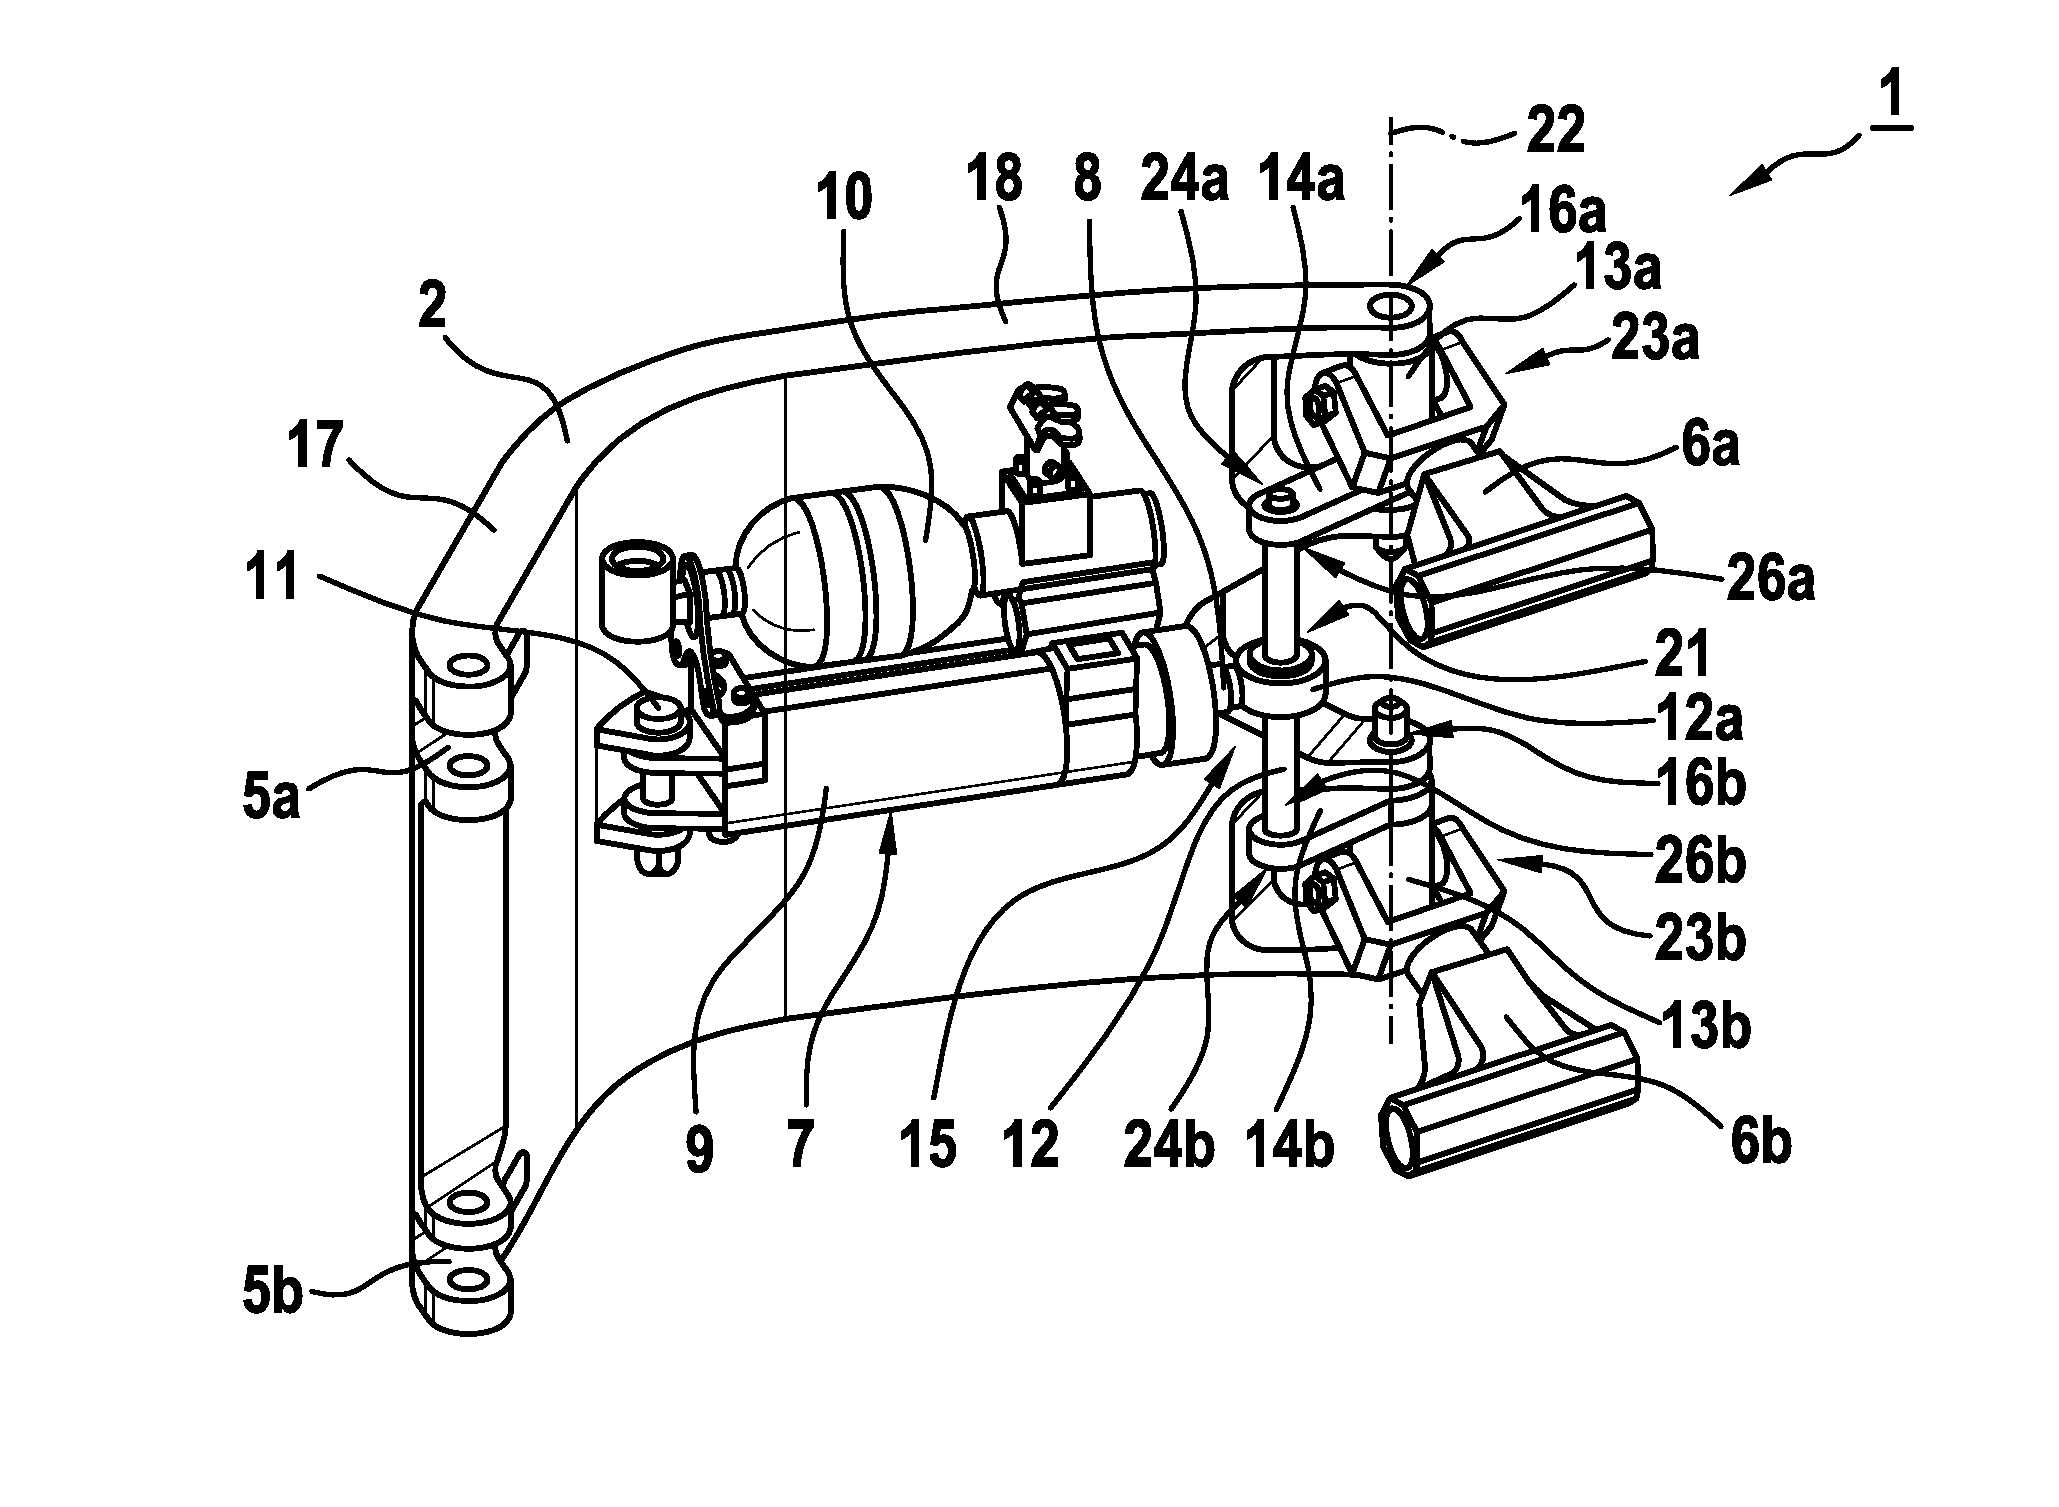 Actuator system for an actuatable door and an aircraft having such an actuatable door